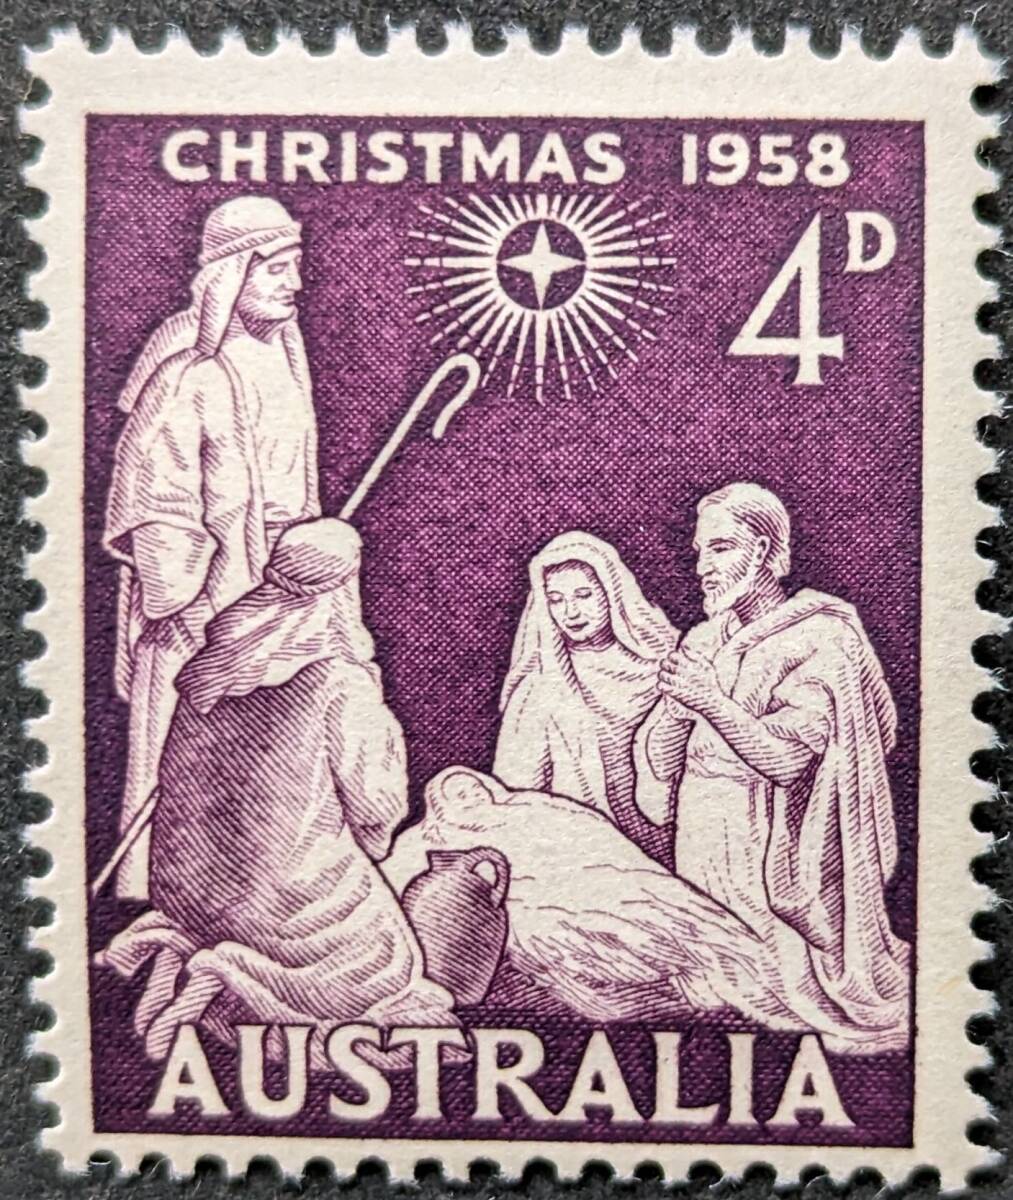 [ foreign stamp ] Australia 1958 year 11 month 05 day issue Christmas unused 